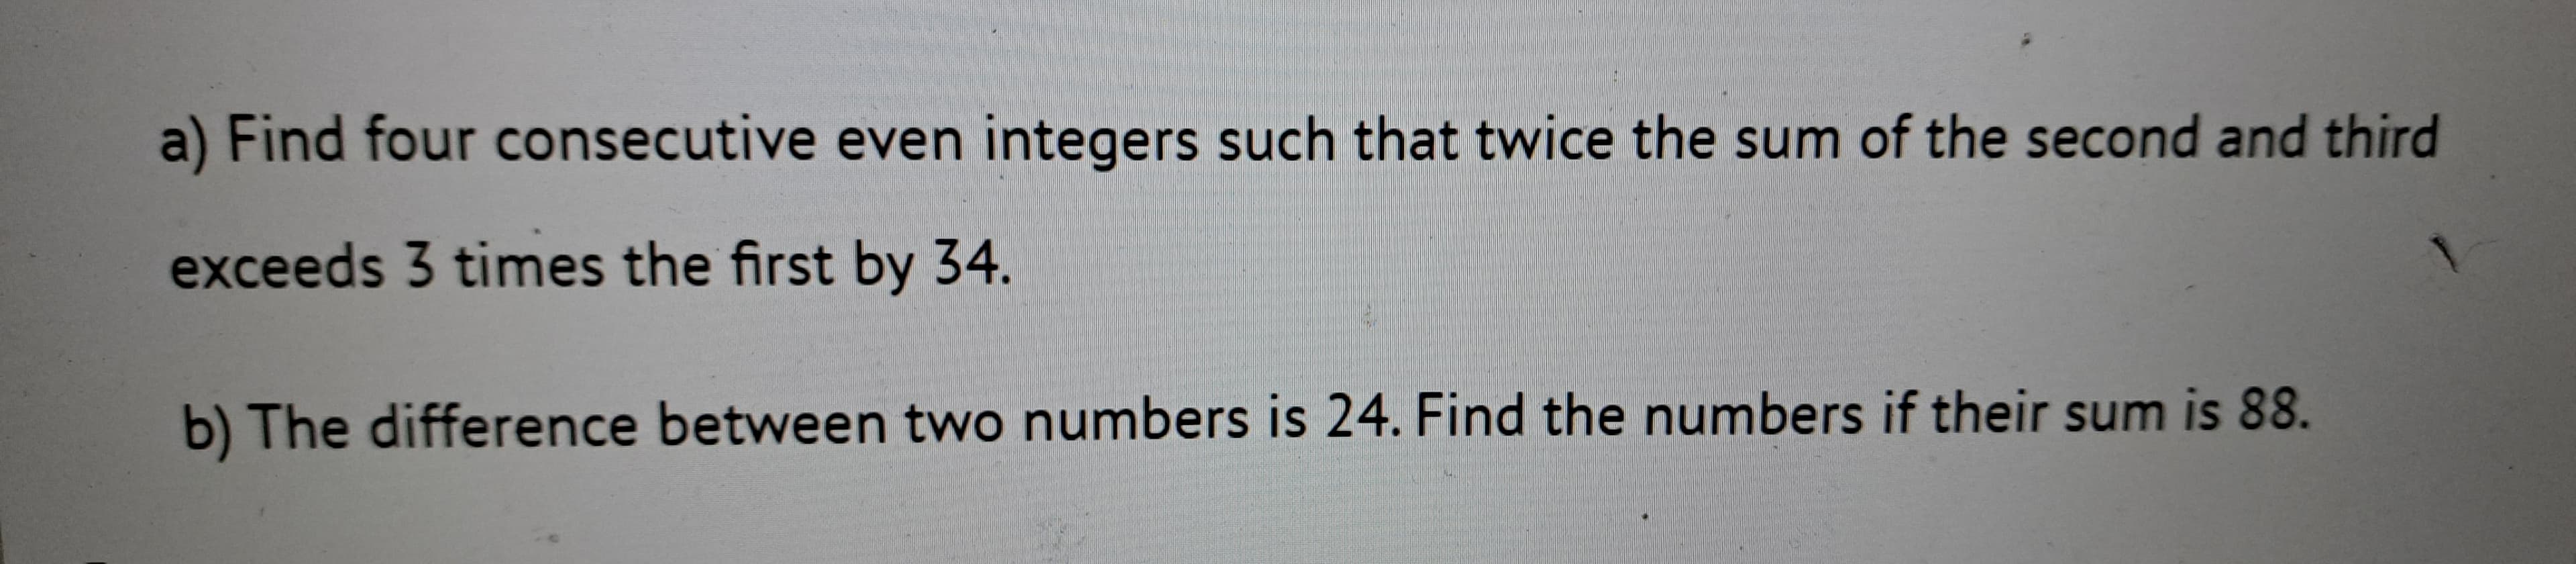 a) Find four consecutive even integers such that twice the sum of the second and third
exceeds 3 times the first by 34.
b) The difference between two numbers is 24. Find the numbers if their sum is 88.